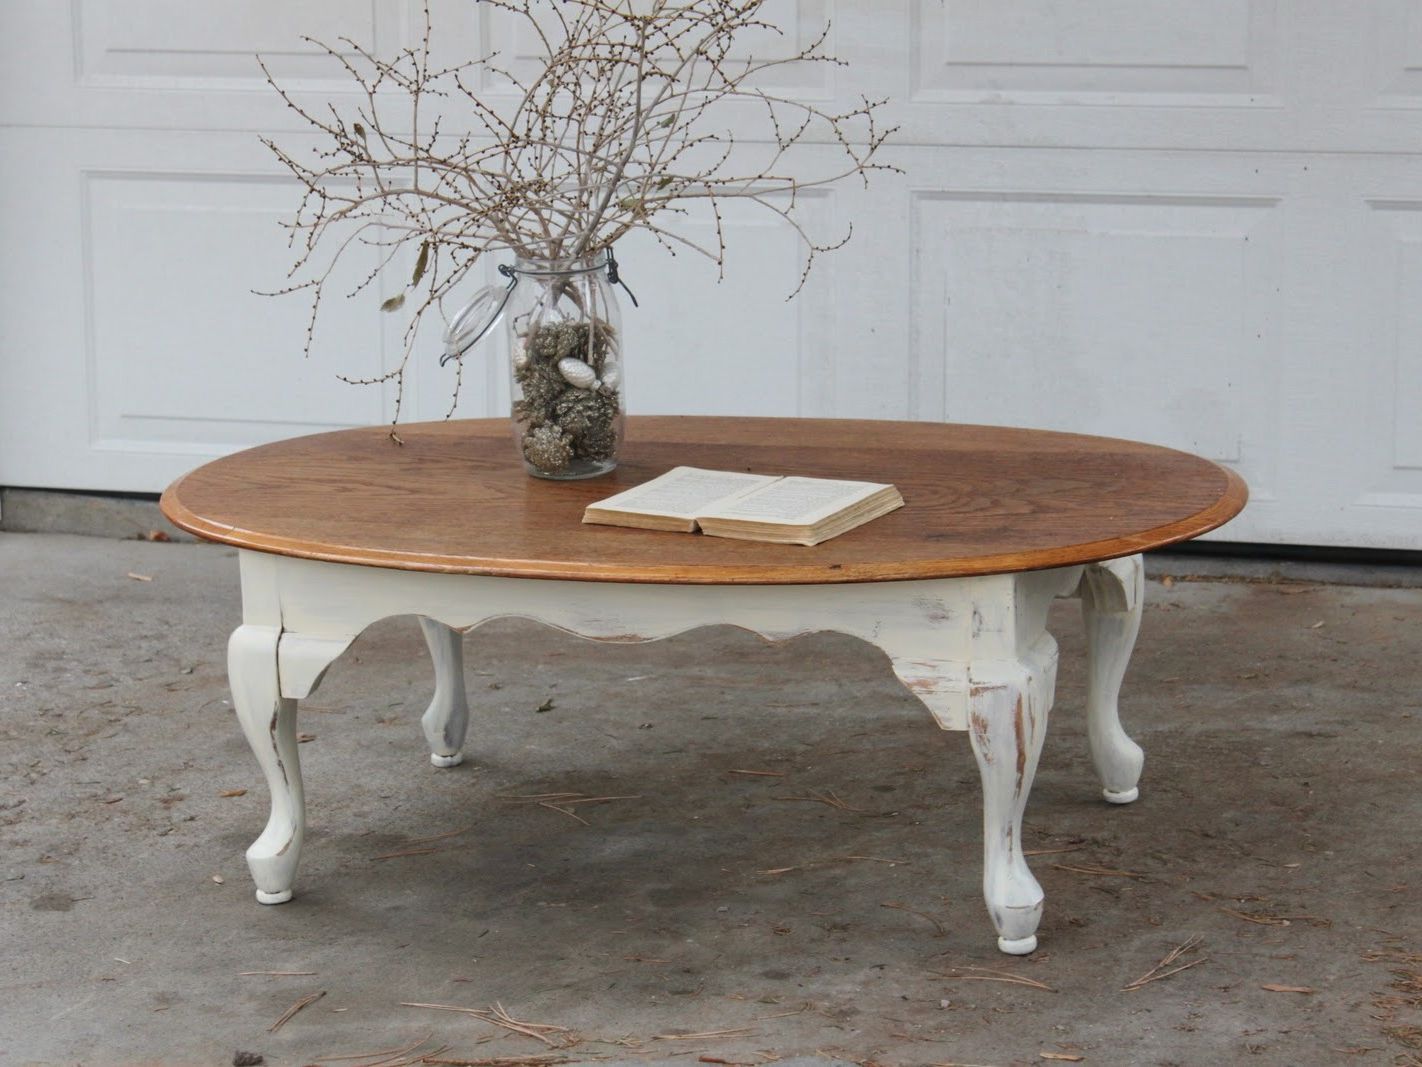 Newest Vintage Coffee Table Design Images Photos Pictures In Antique White Black Coffee Tables (View 4 of 10)